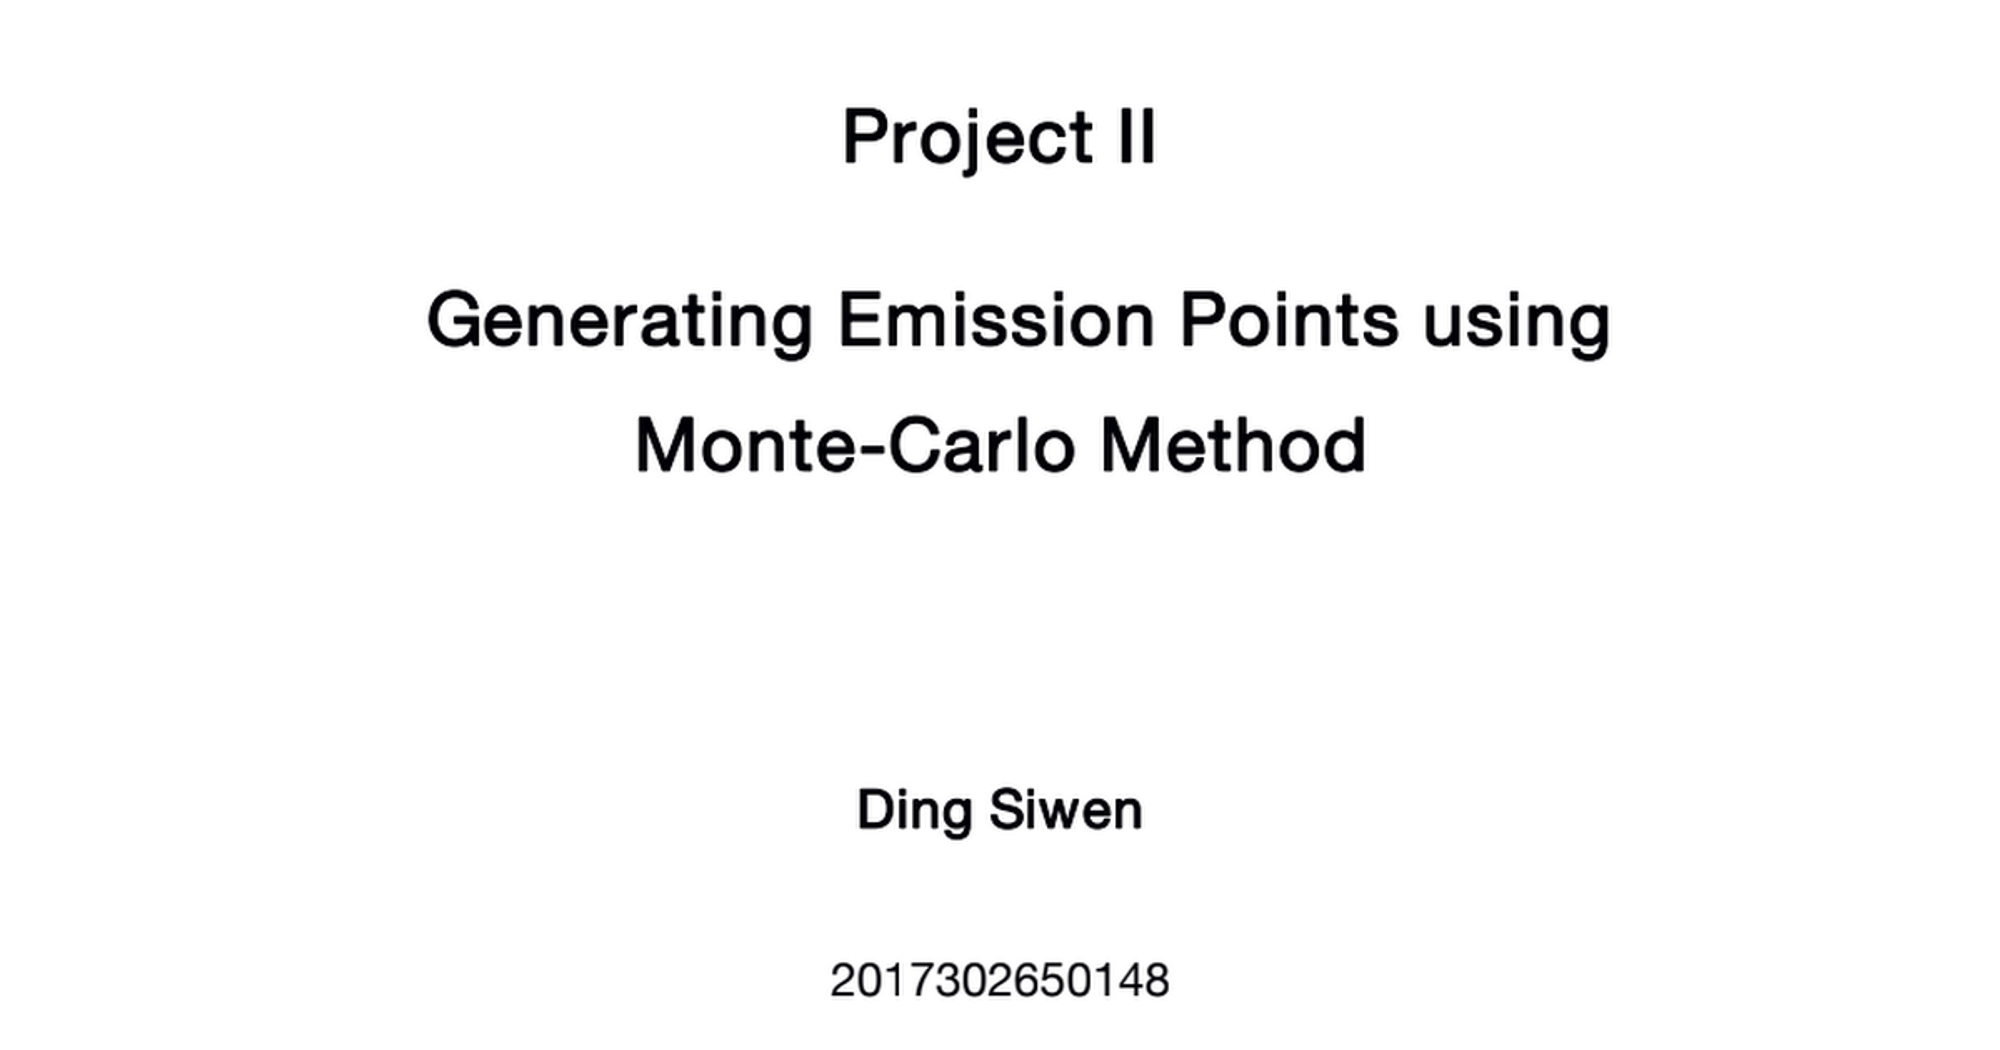 Project II-Generating Emission Points using Monte-Carlo Method in Python.pdf